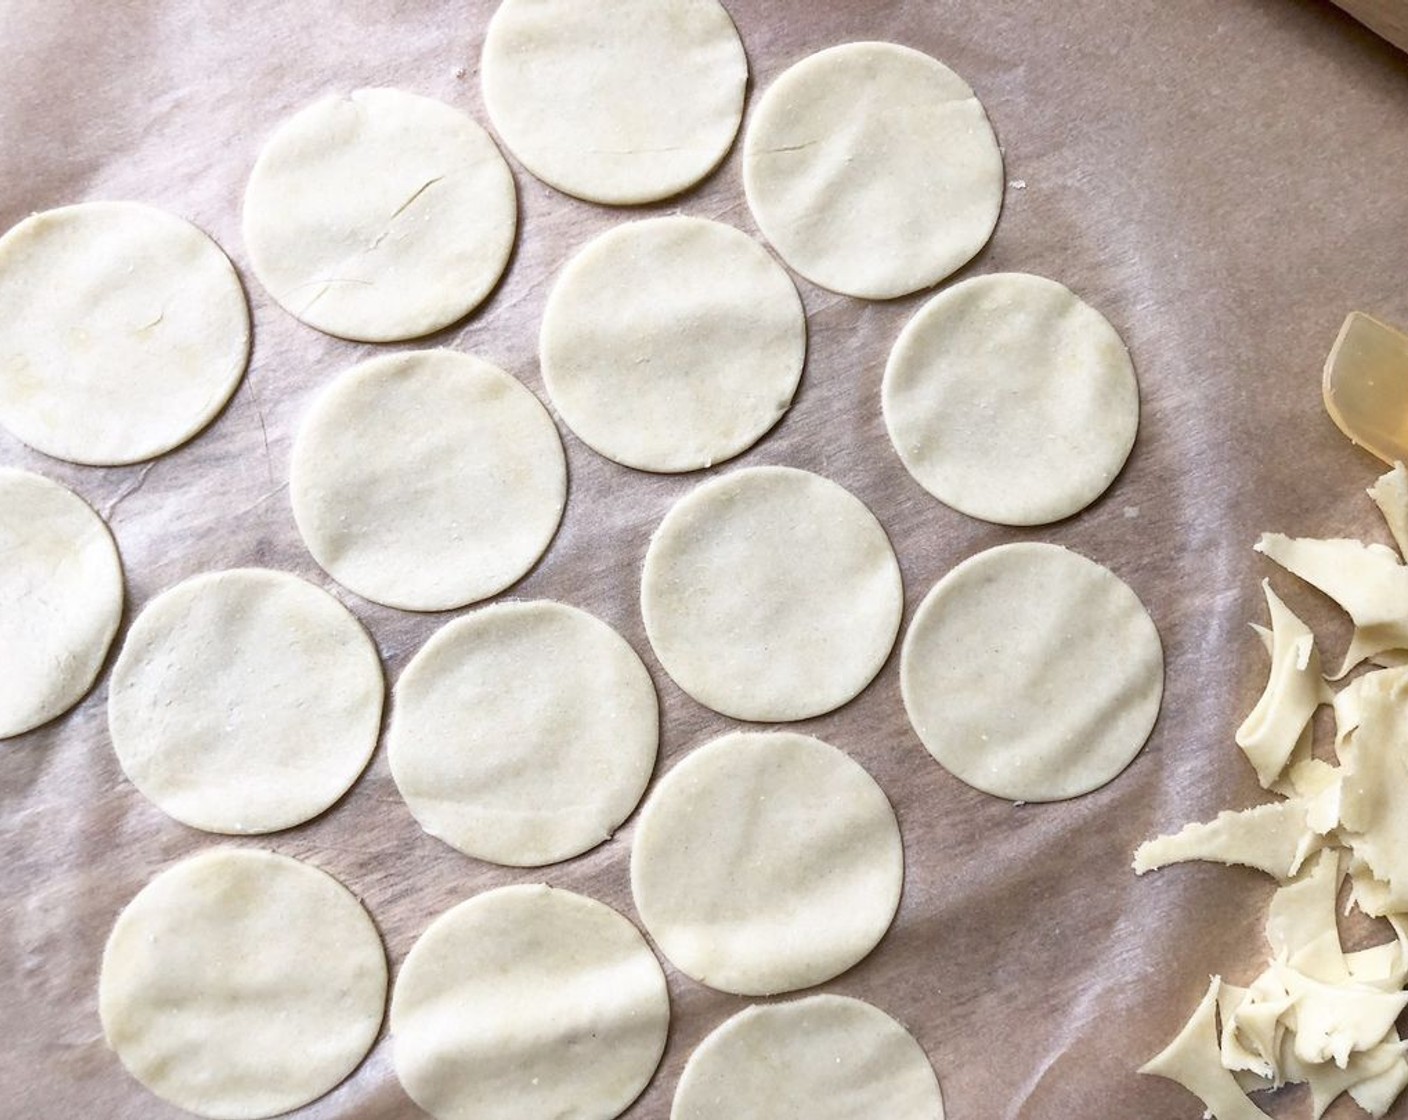 step 7 Cut out the crackers with a 2-inch round cookie cutter as closely as possible. Pull up the outline of the dough, leaving the round cutouts on the paper. Slide the paper onto the preheated baking sheet.